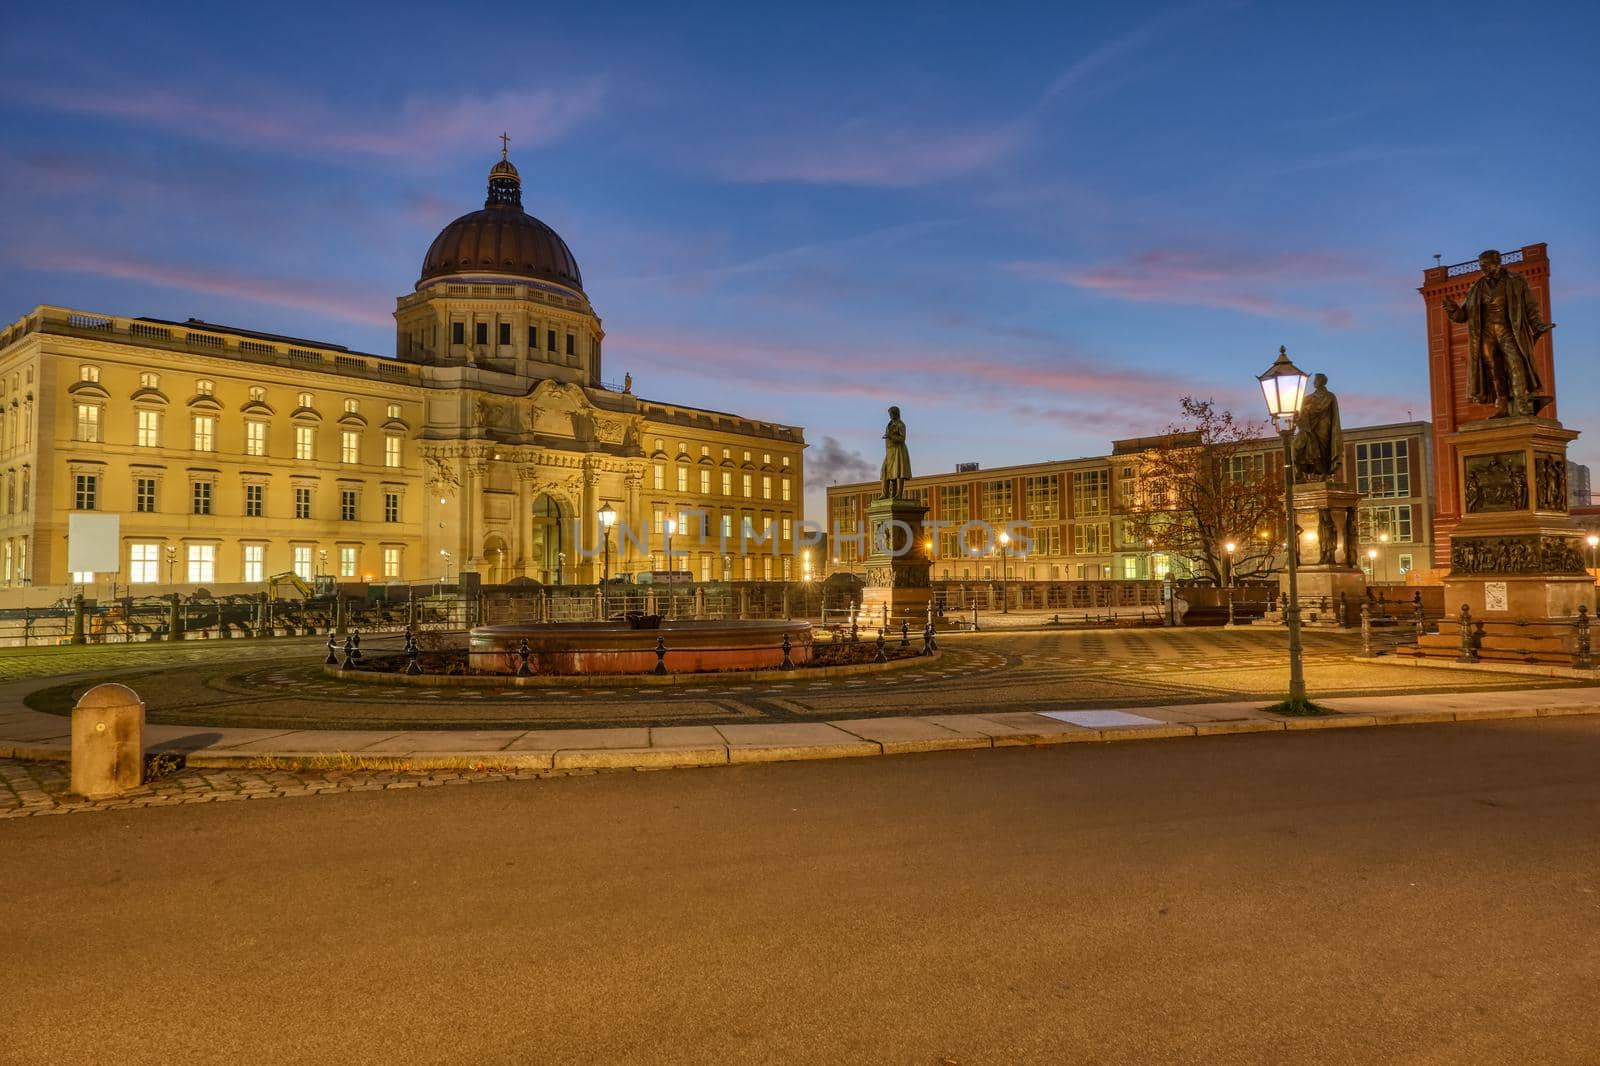 The reconstructed City Palace in Berlin at twilight